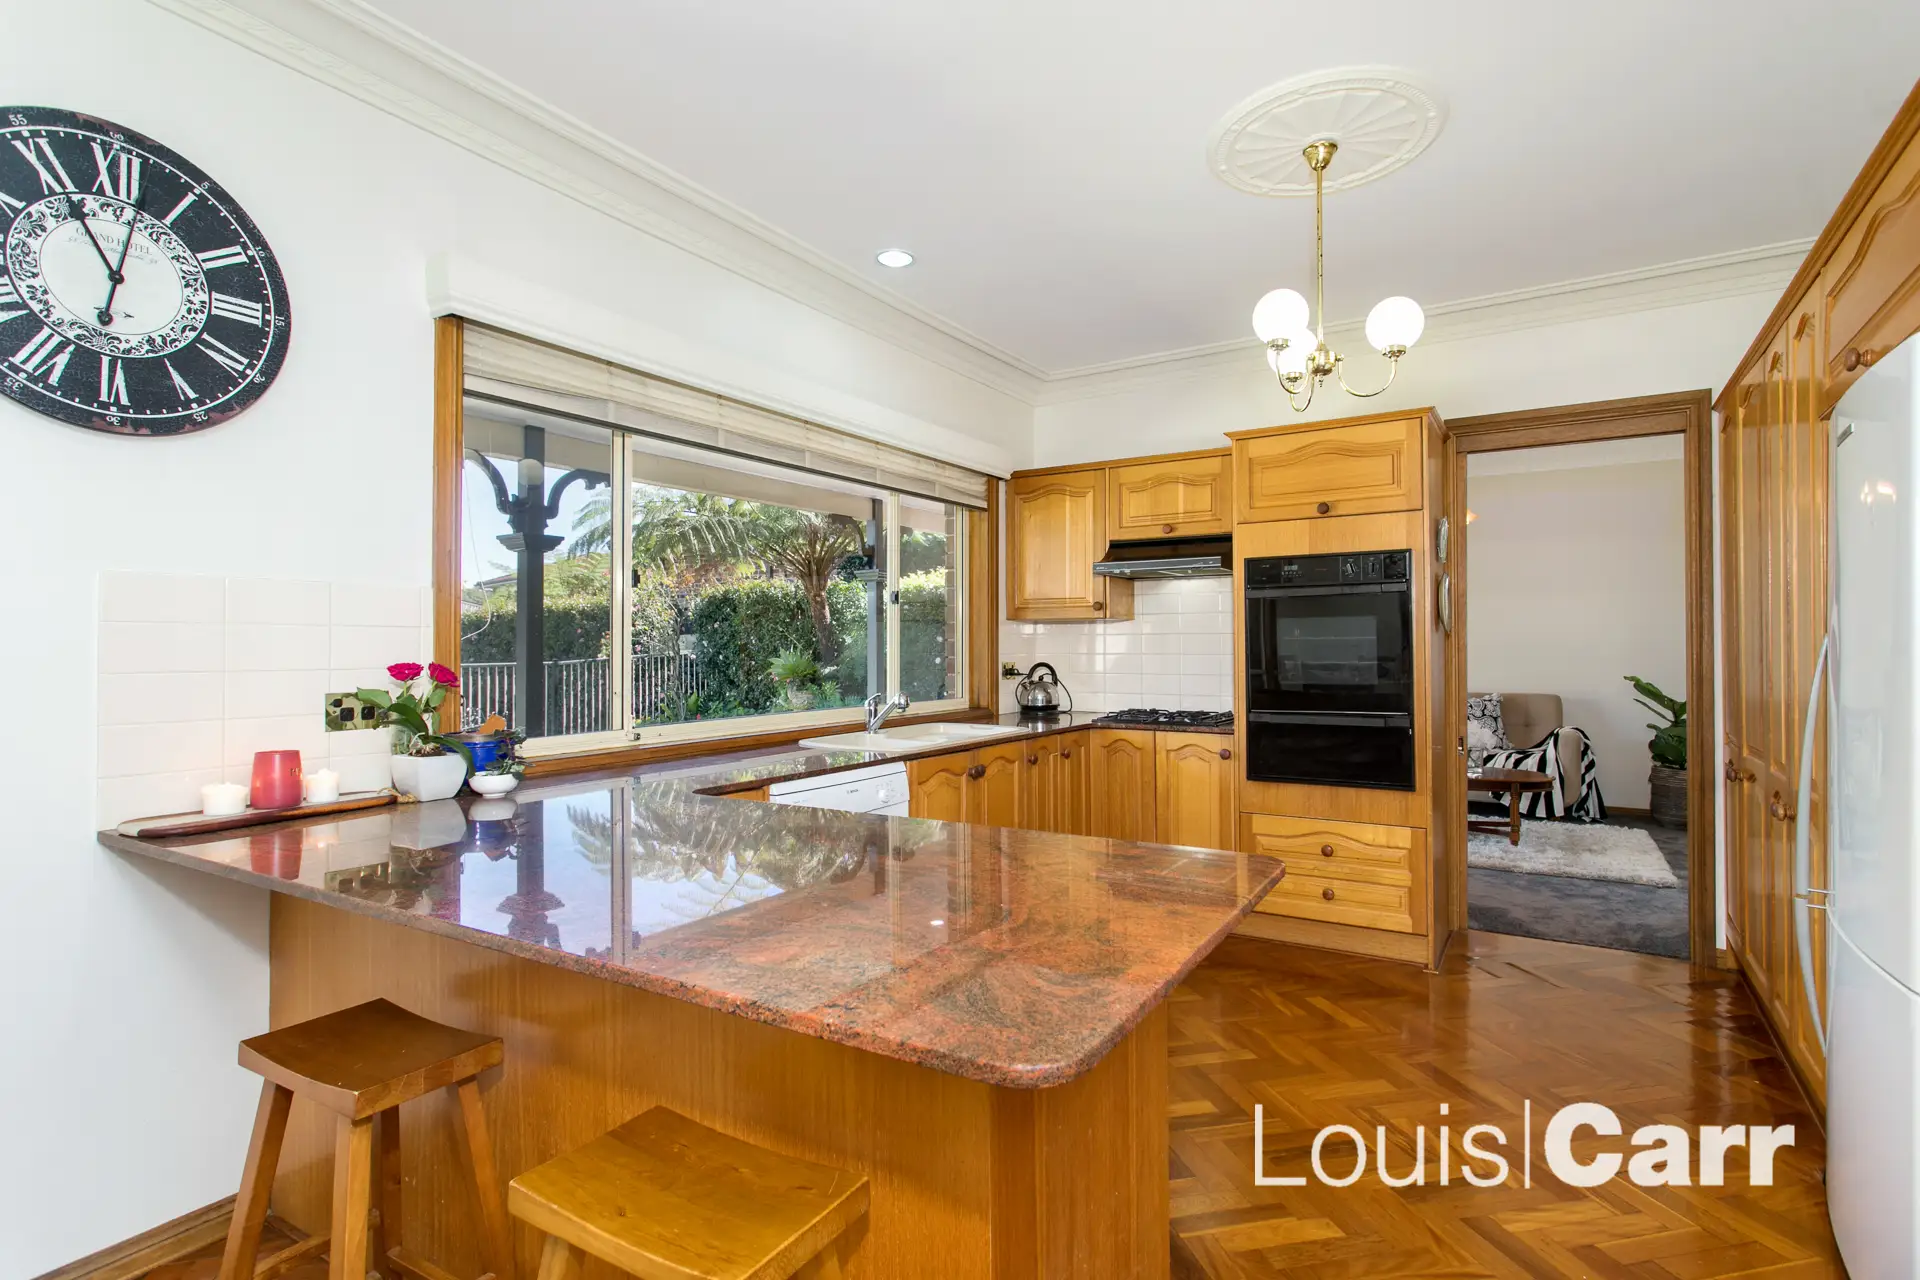 Photo #3: 15 Josephine Crescent, Cherrybrook - Sold by Louis Carr Real Estate